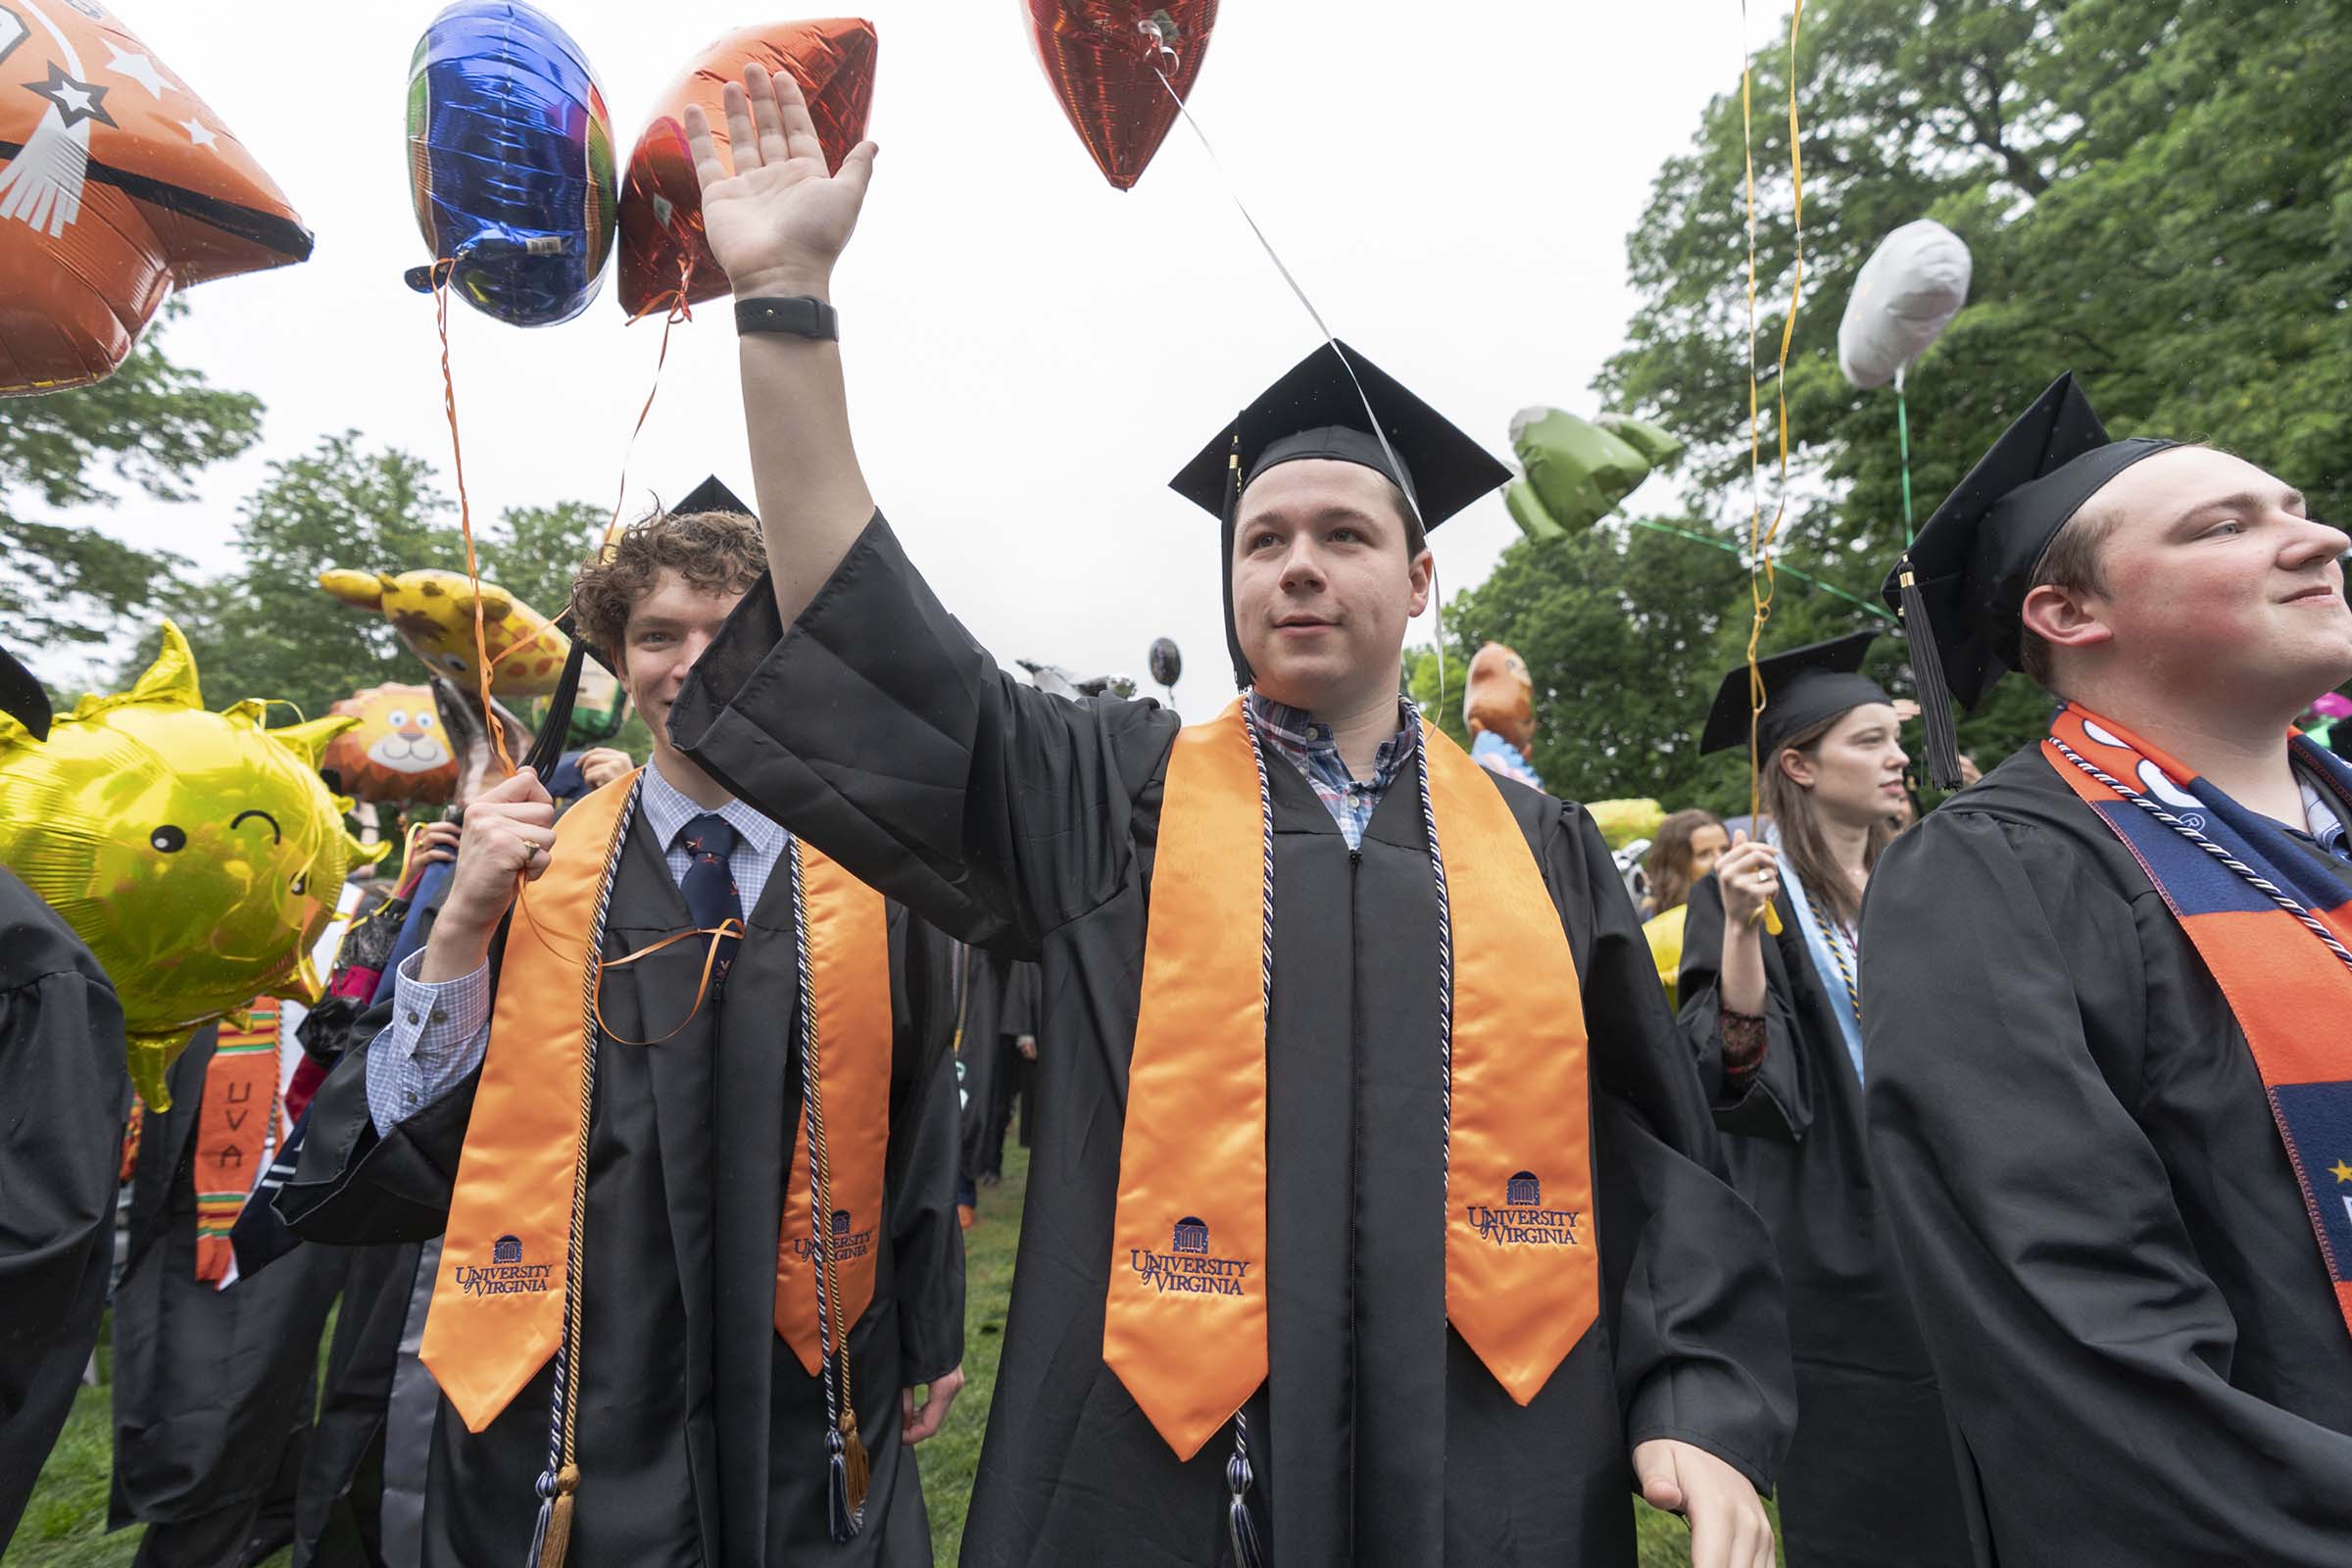 Graduating students wearing orange stoles processing down the Lawn